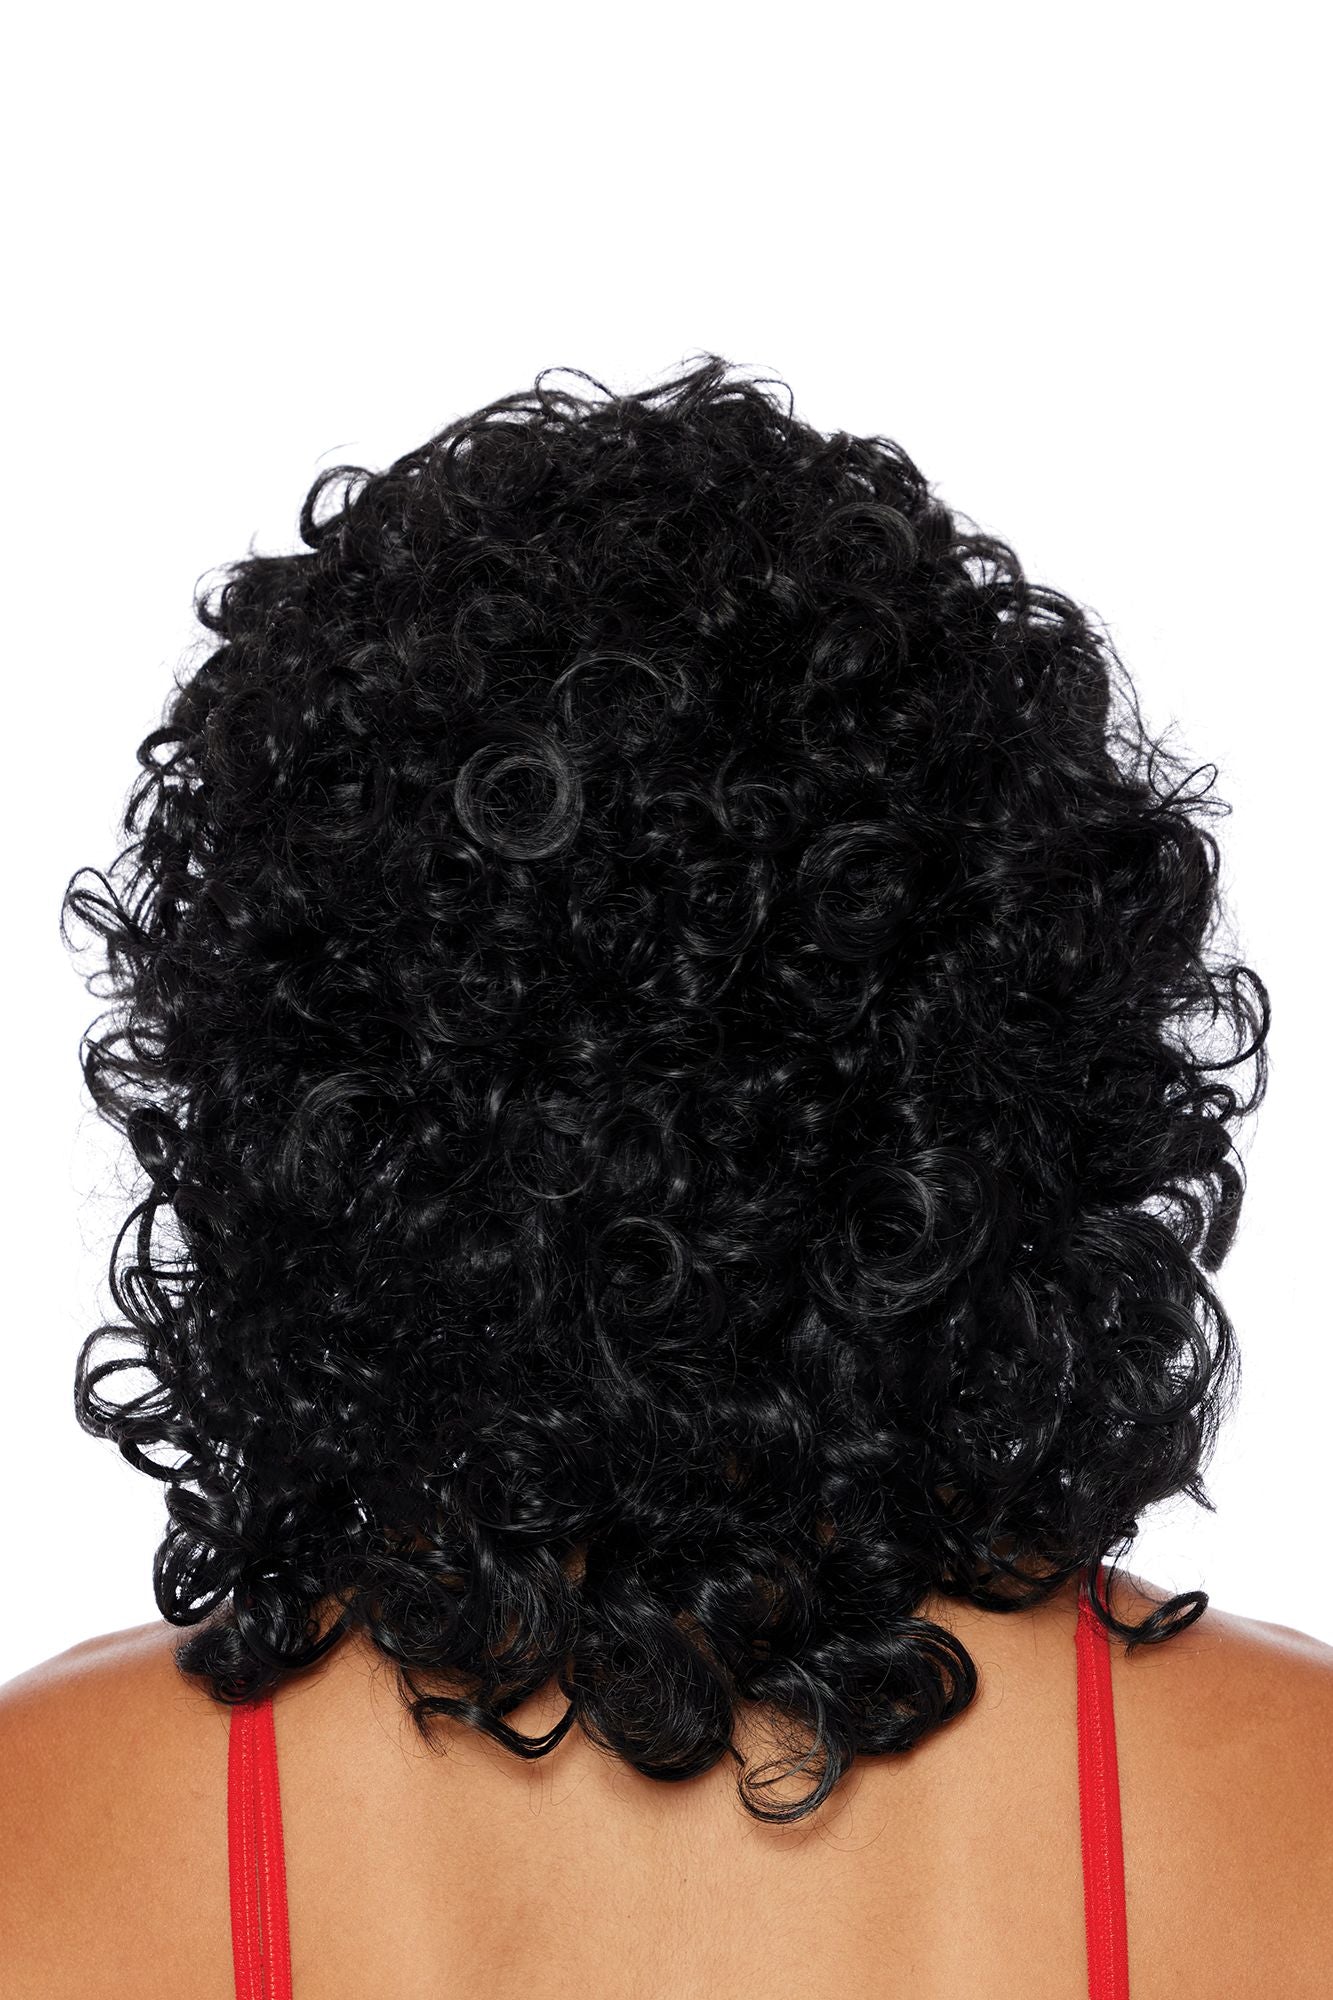 70's Black Curly Wig